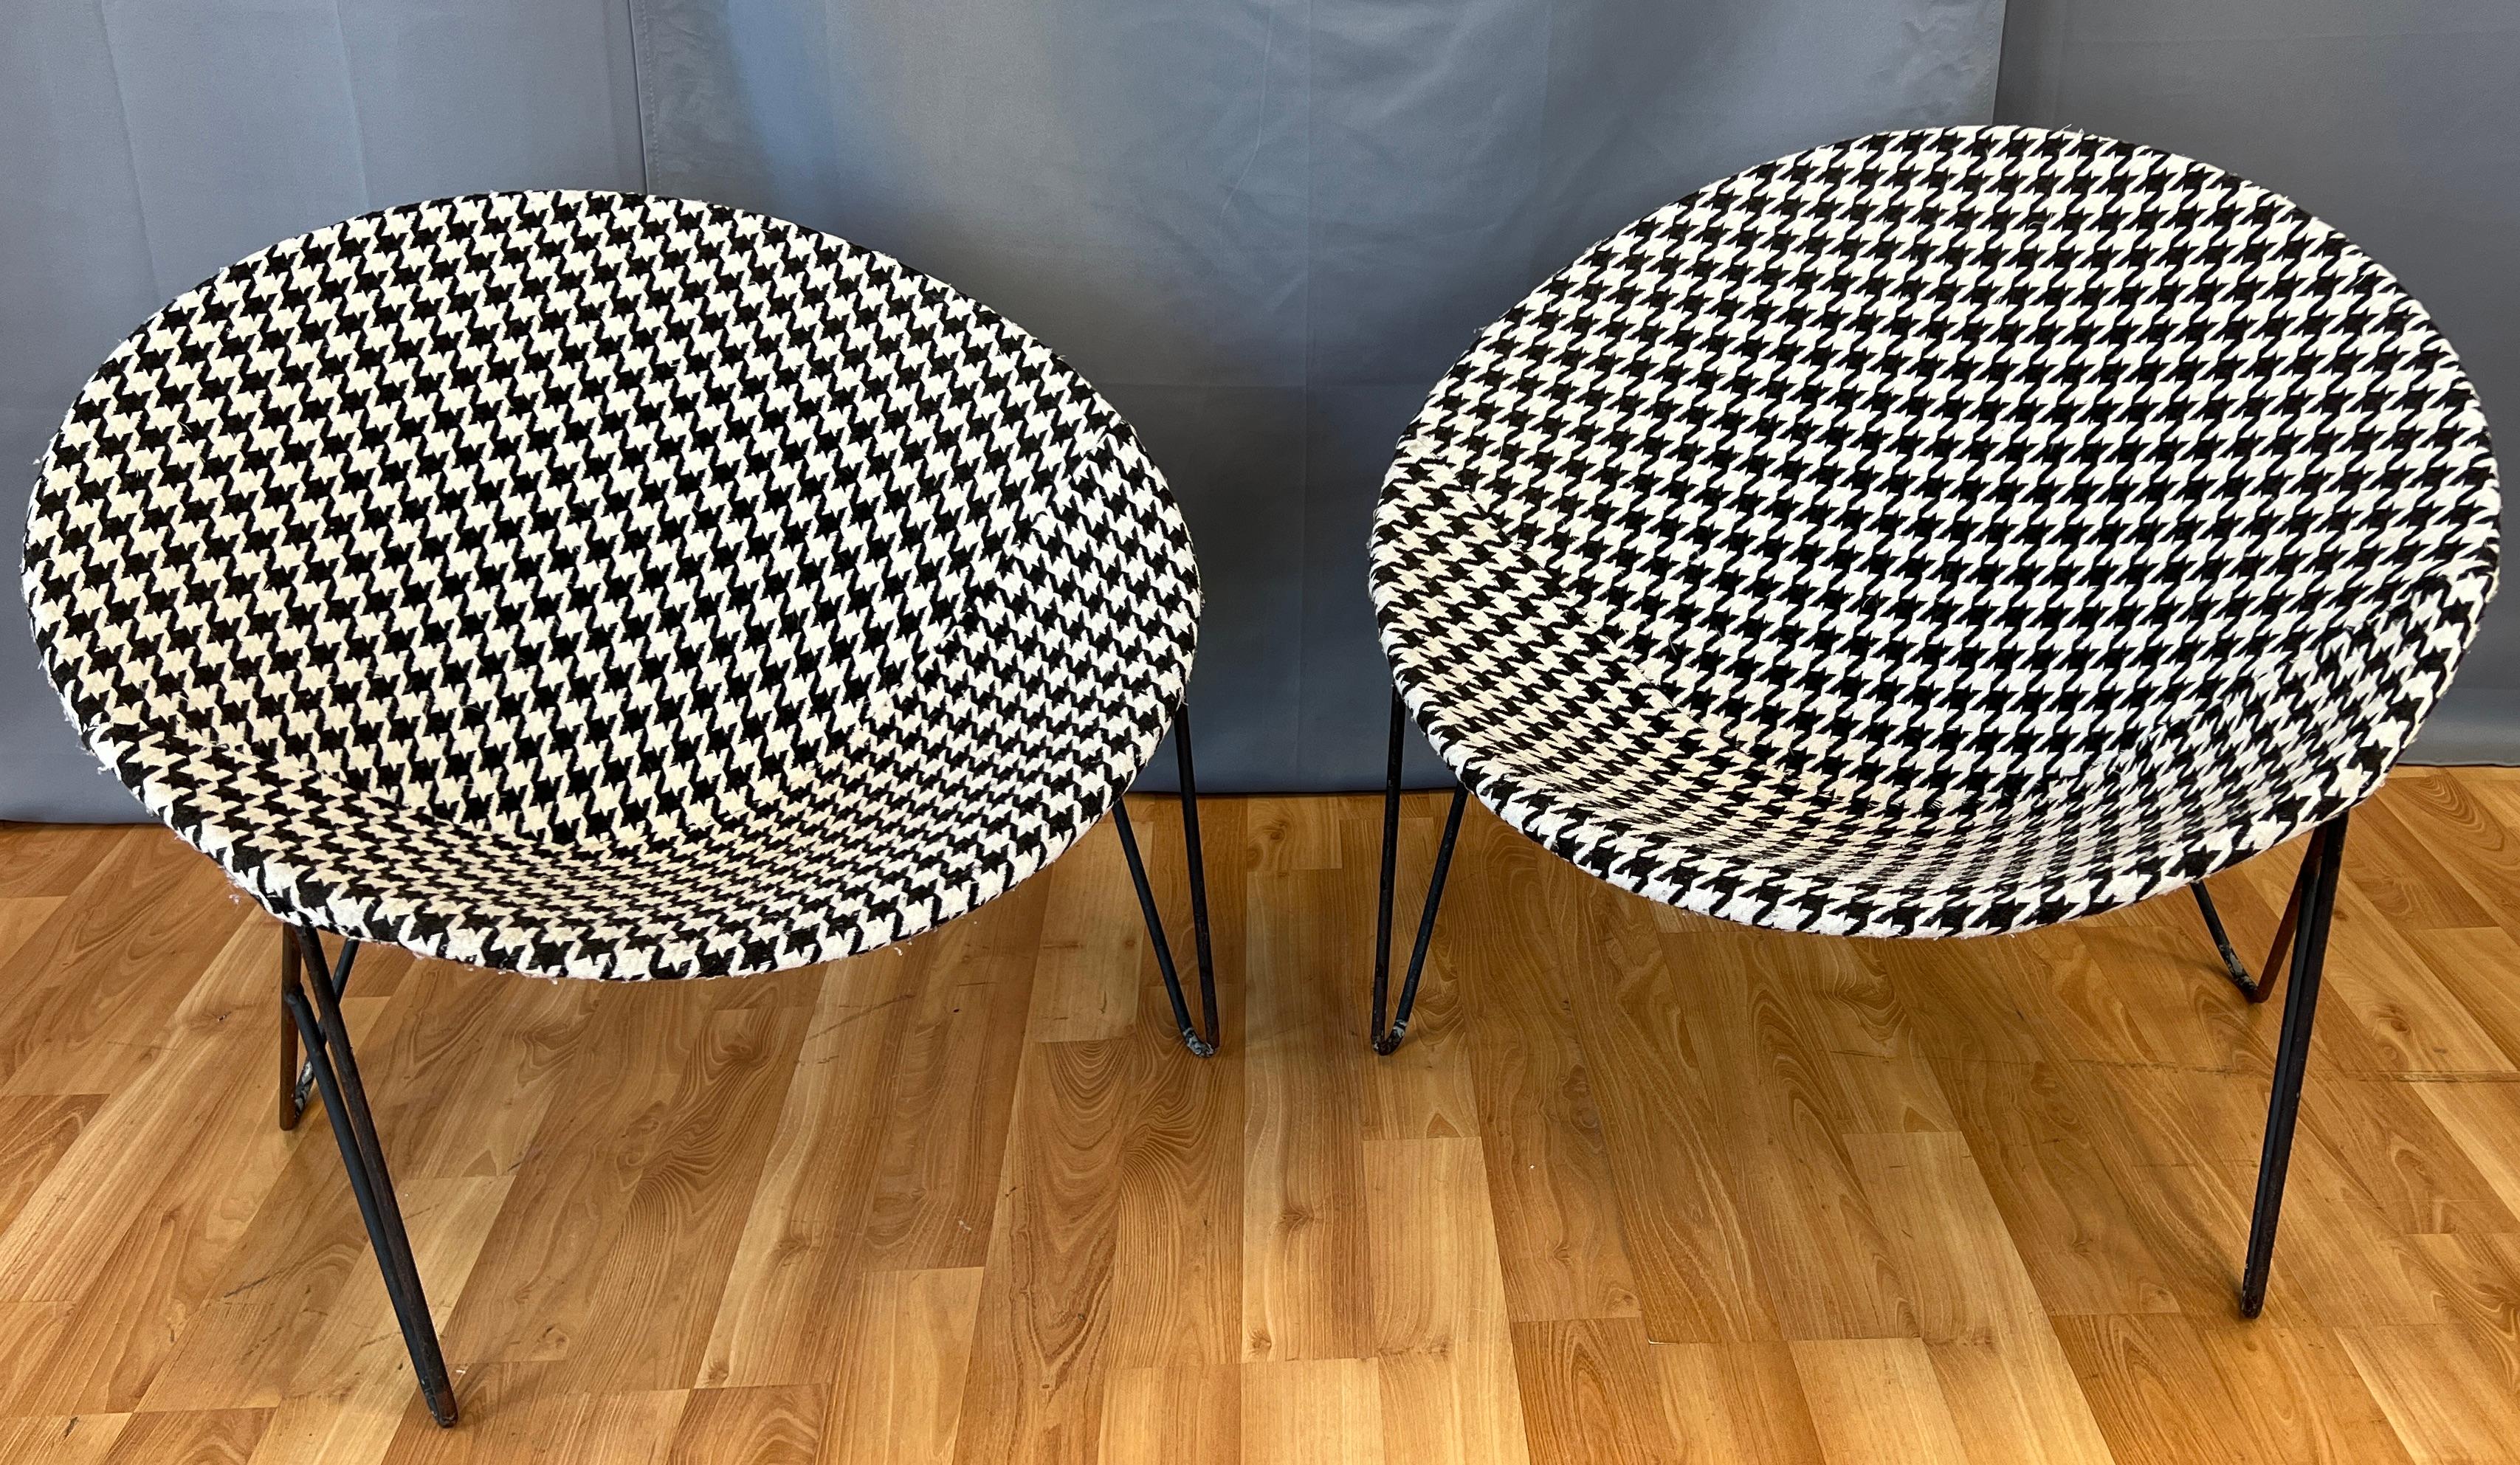 Pair of Mid-century 1950s Wrought Iron Hoop Chairs Black/White Upholstery  For Sale 10